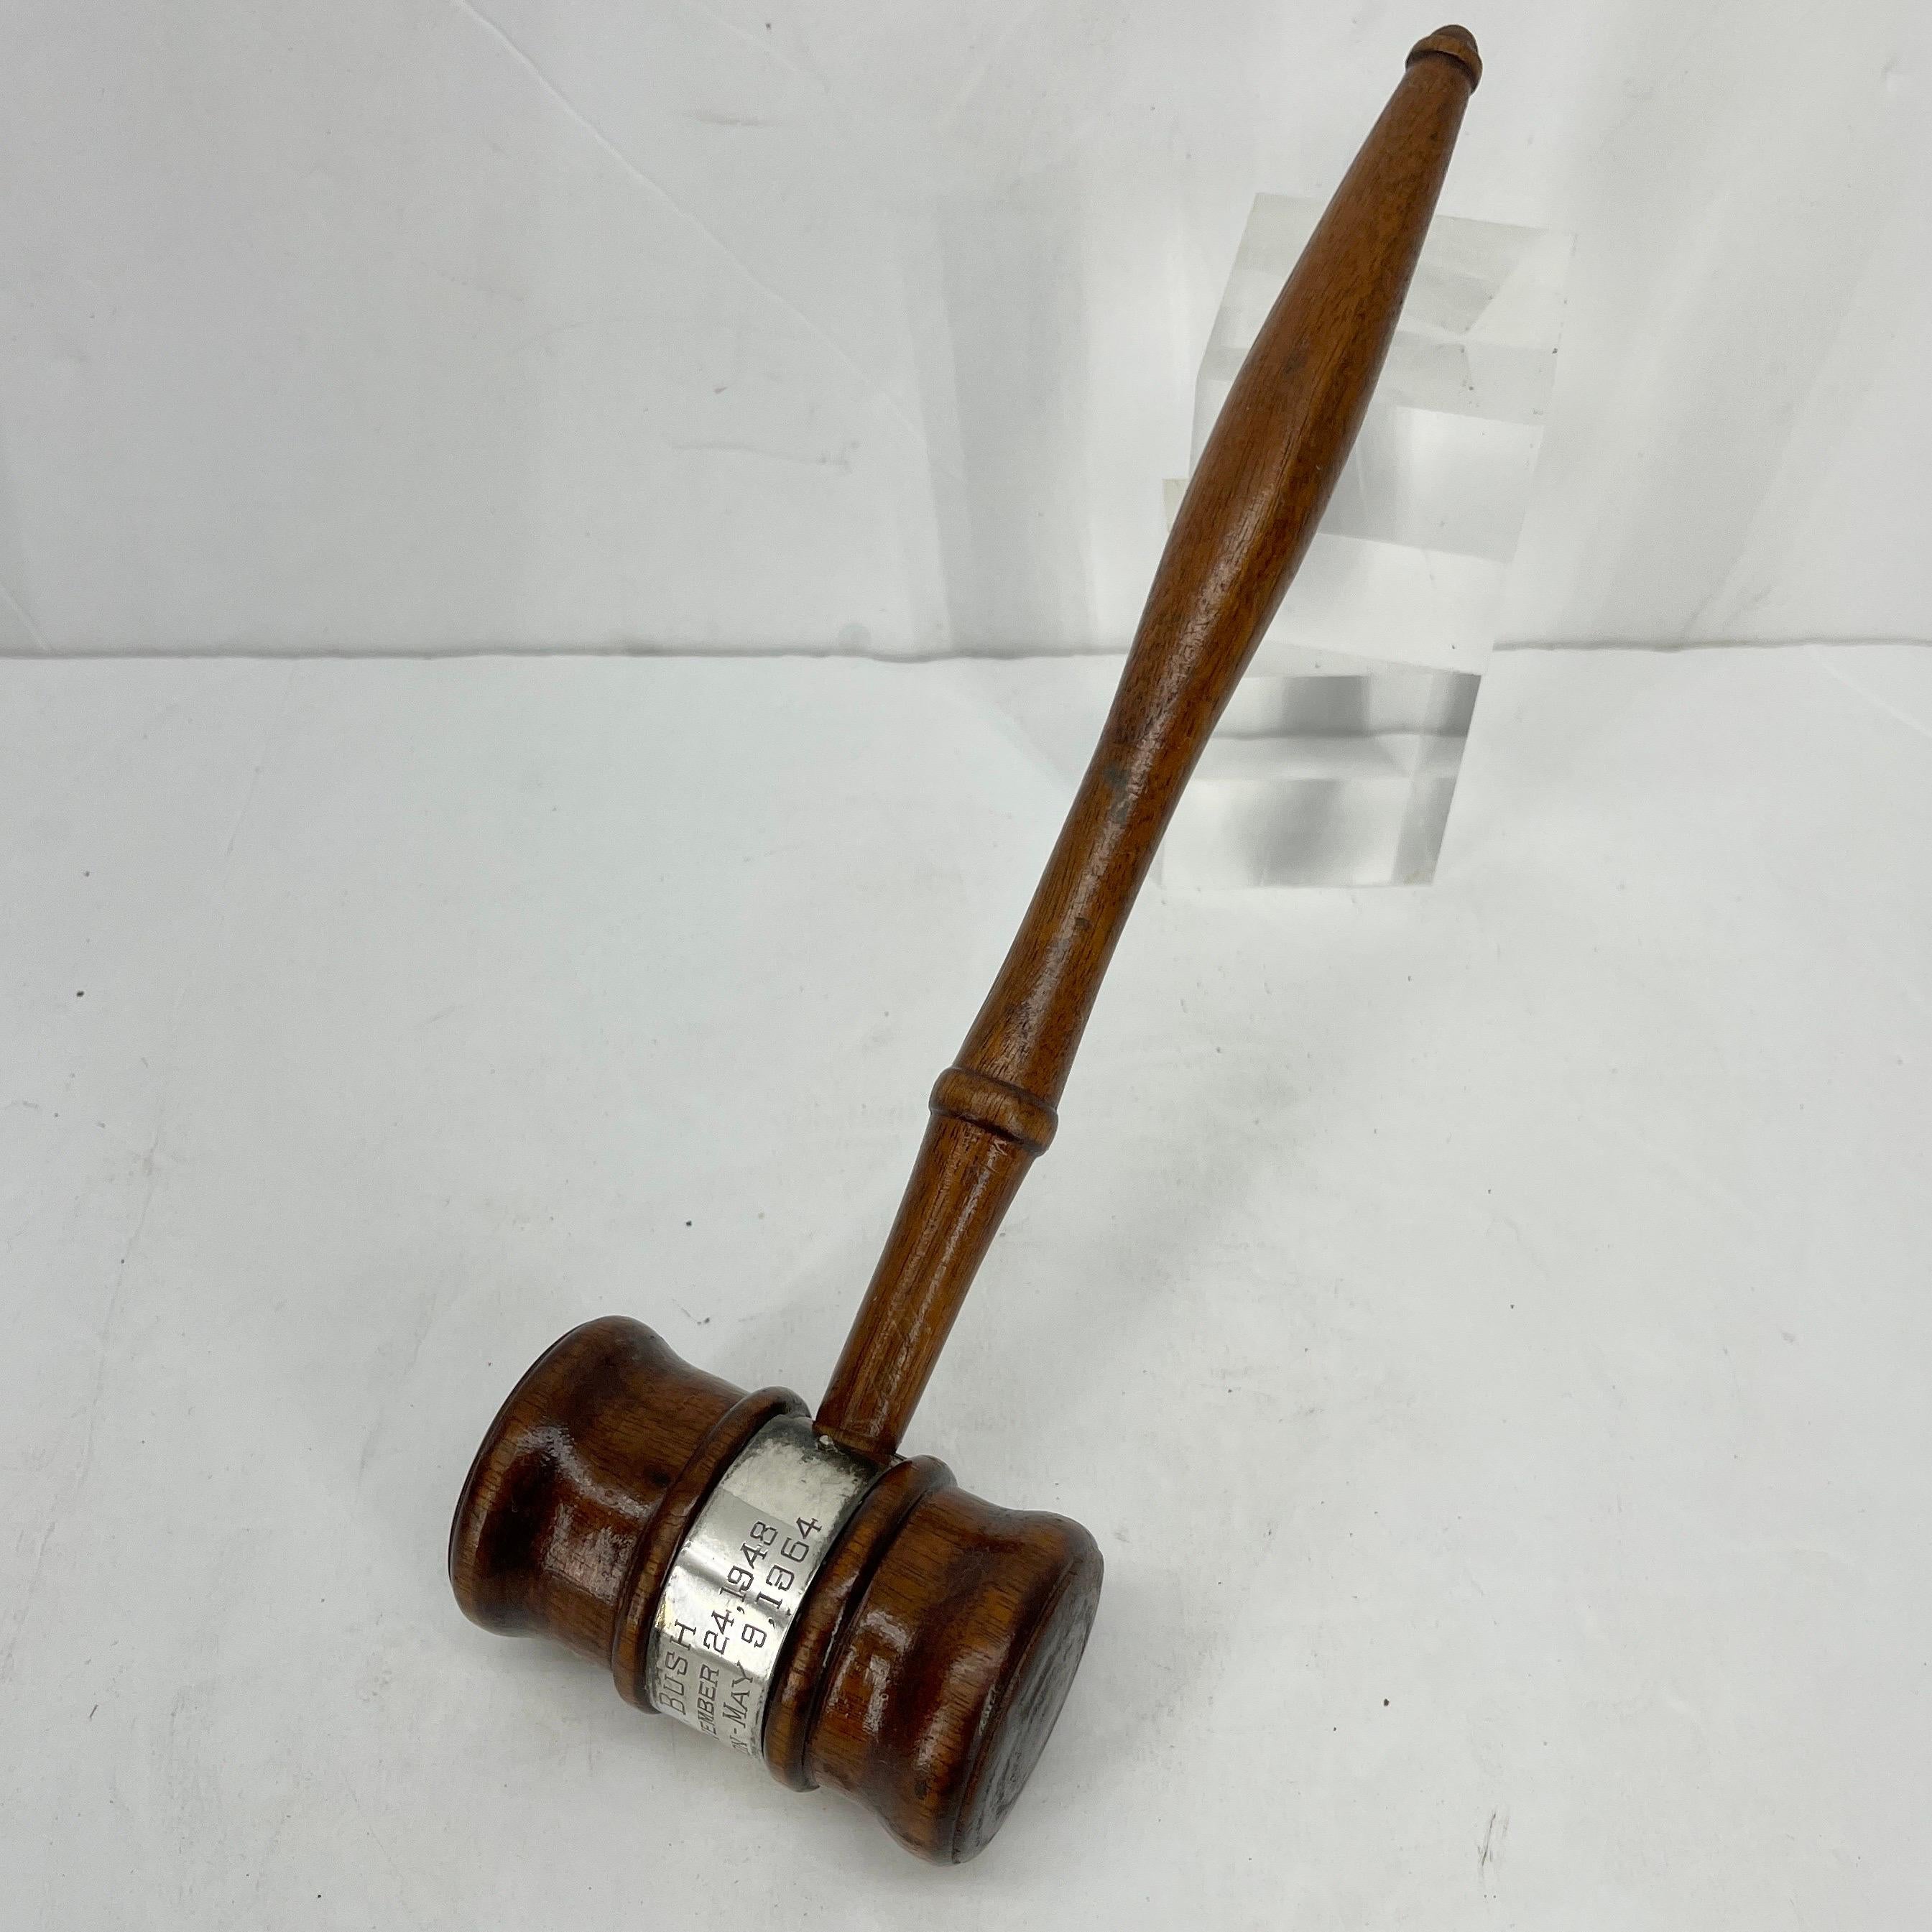 Antique Silver and Wooden Presentation Judge's Gavel, circa 1960s For Sale 2